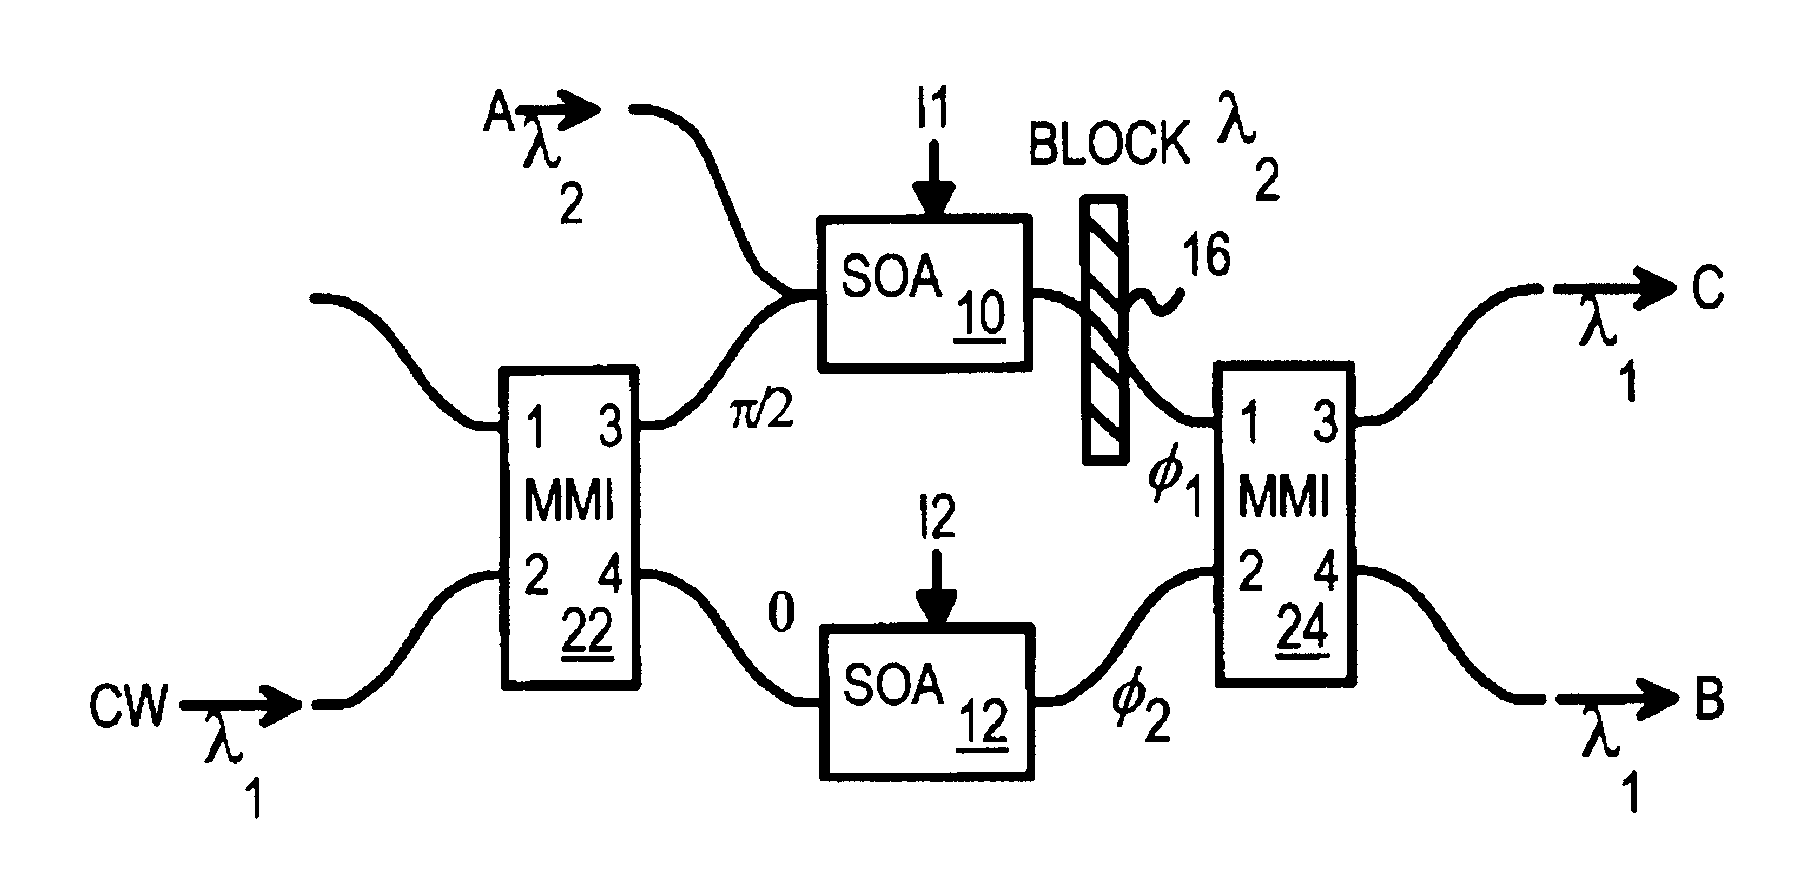 All optical logic using cross-phase modulation amplifiers and mach-zehnder interferometers with phase-shift devices